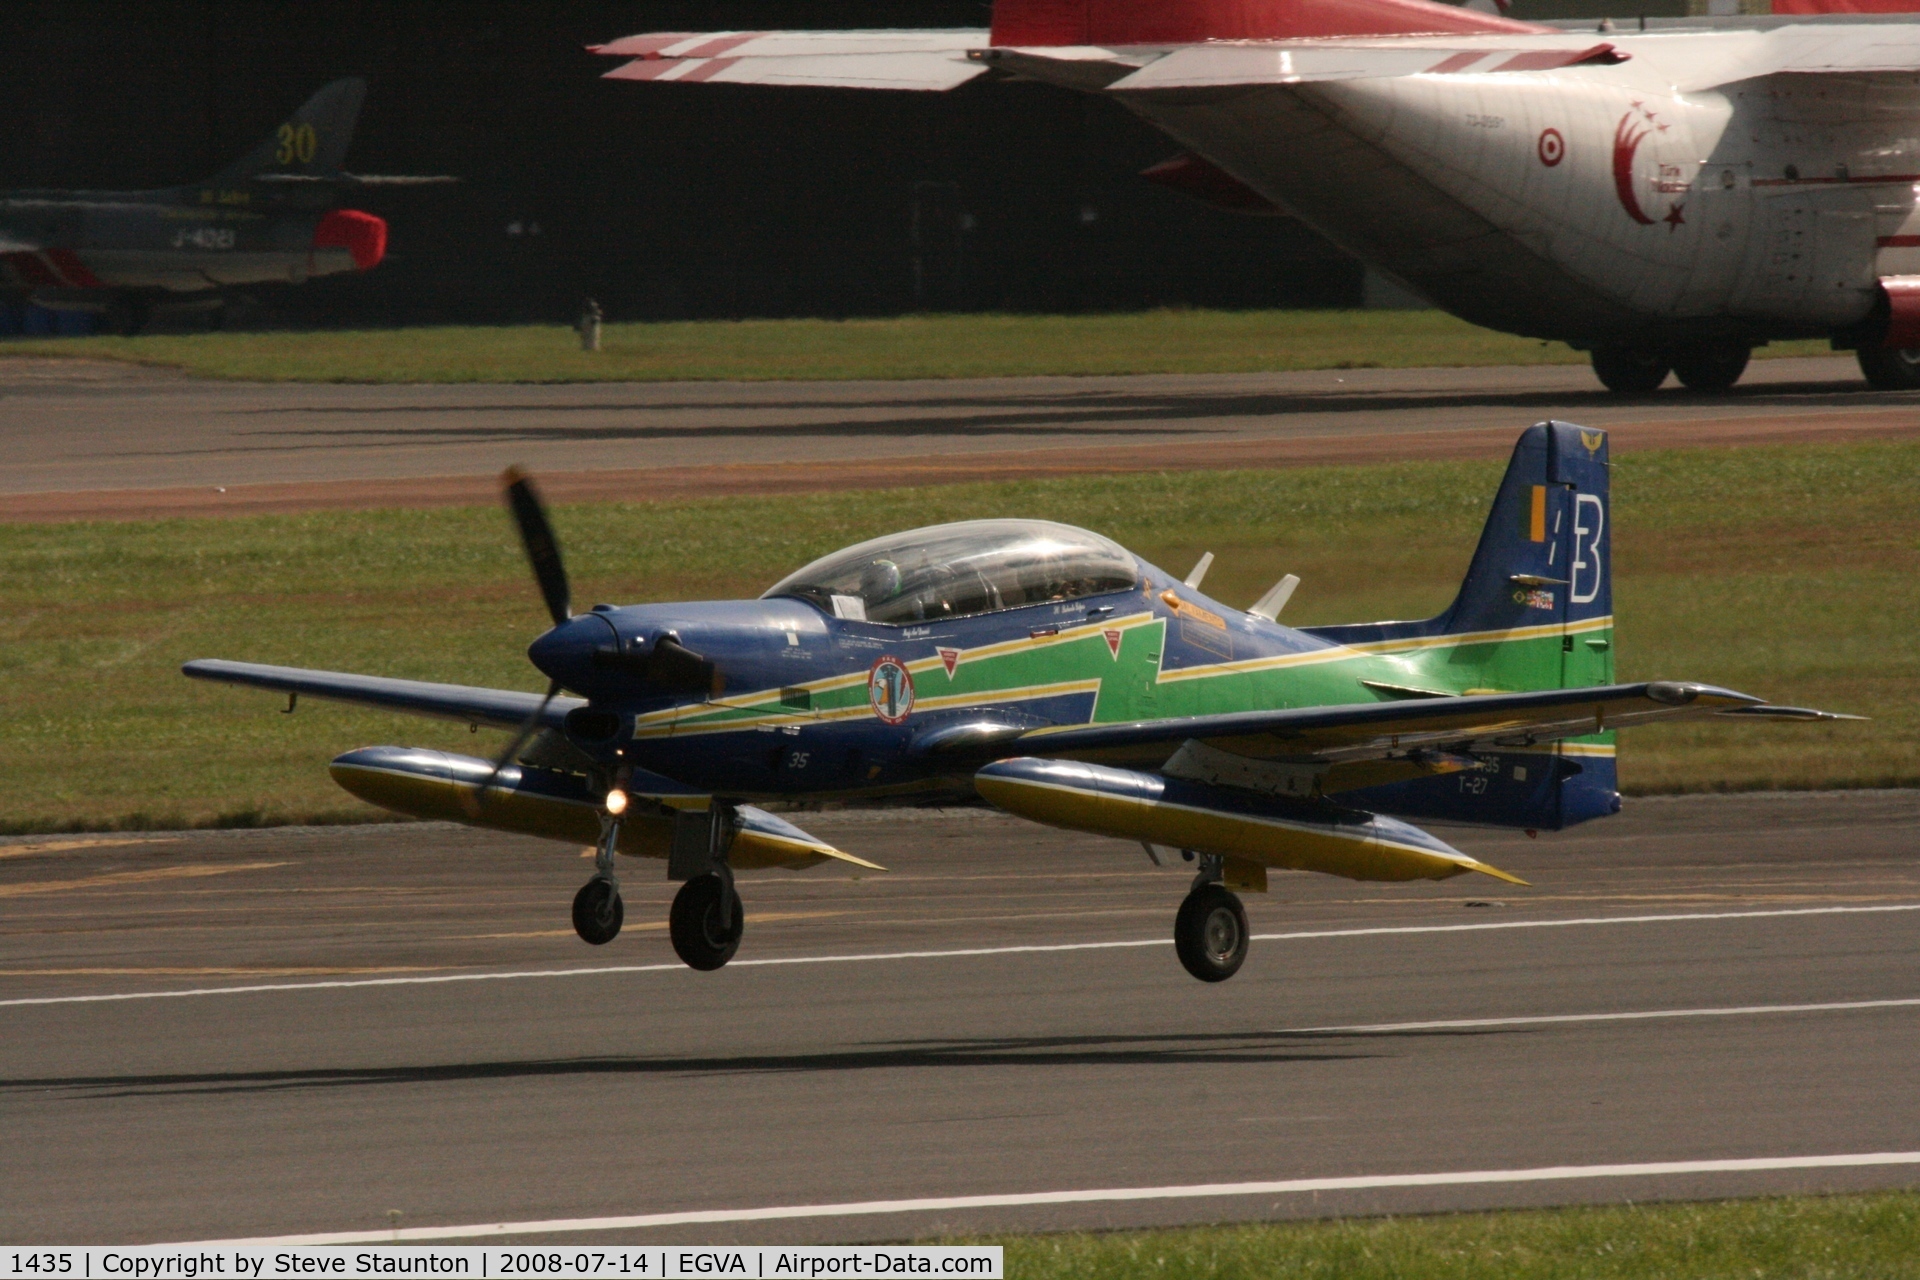 1435, Embraer T-27 Tucano (EMB-312) C/N 312395, Taken at the Royal International Air Tattoo 2008 during arrivals and departures (show days cancelled due to bad weather)